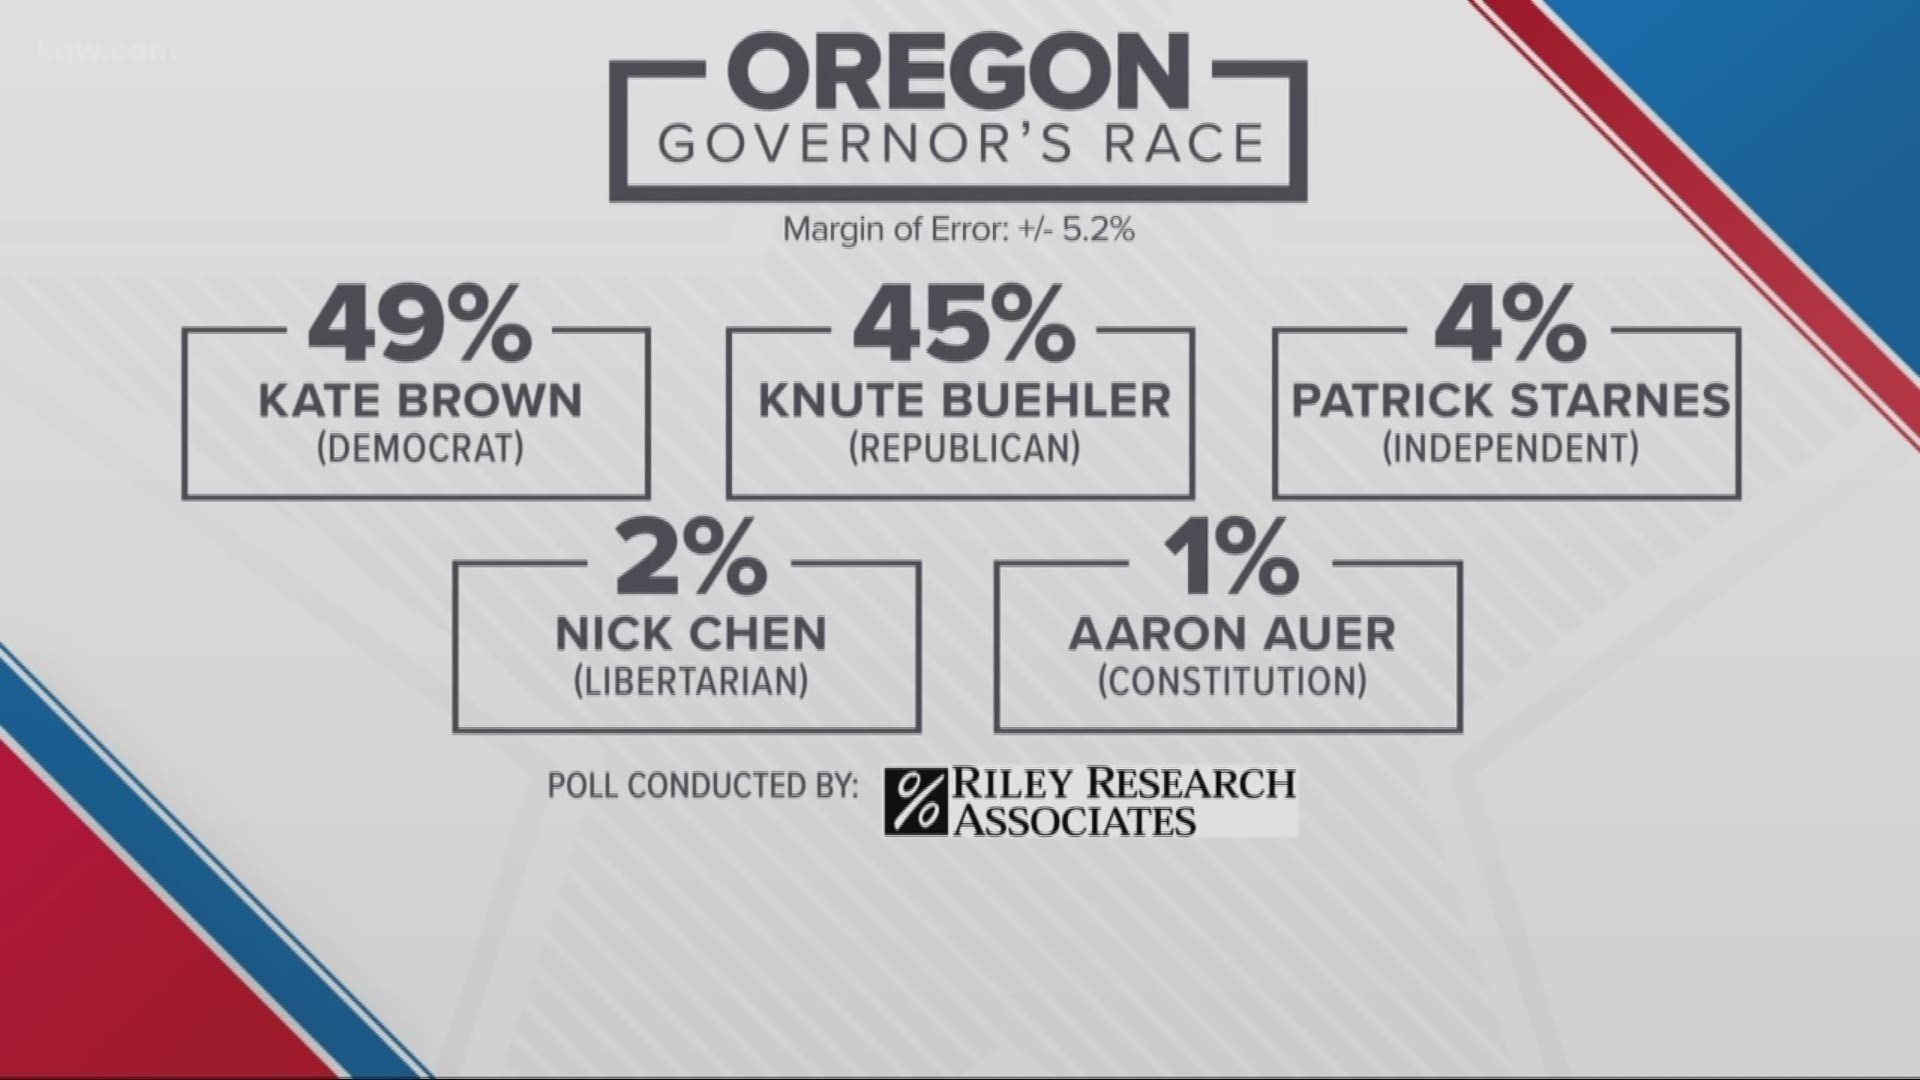 The race for Oregon governor is very close, a new poll shows.